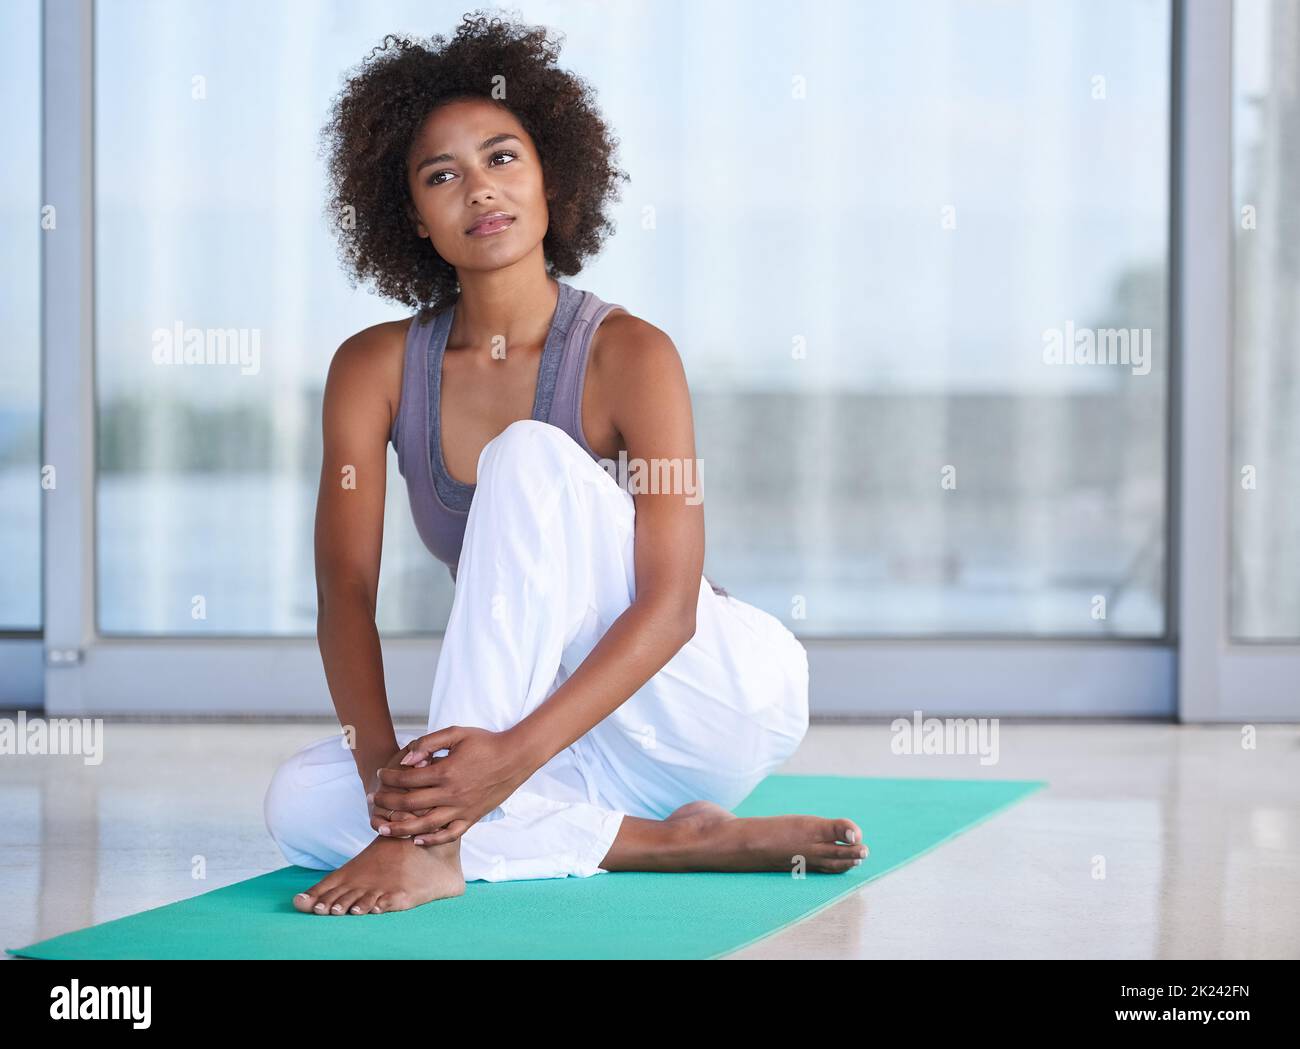 Pleasant Slim Woman Standing on the Yoga Mat Stock Photo - Image of  apartment, hobby: 136954162